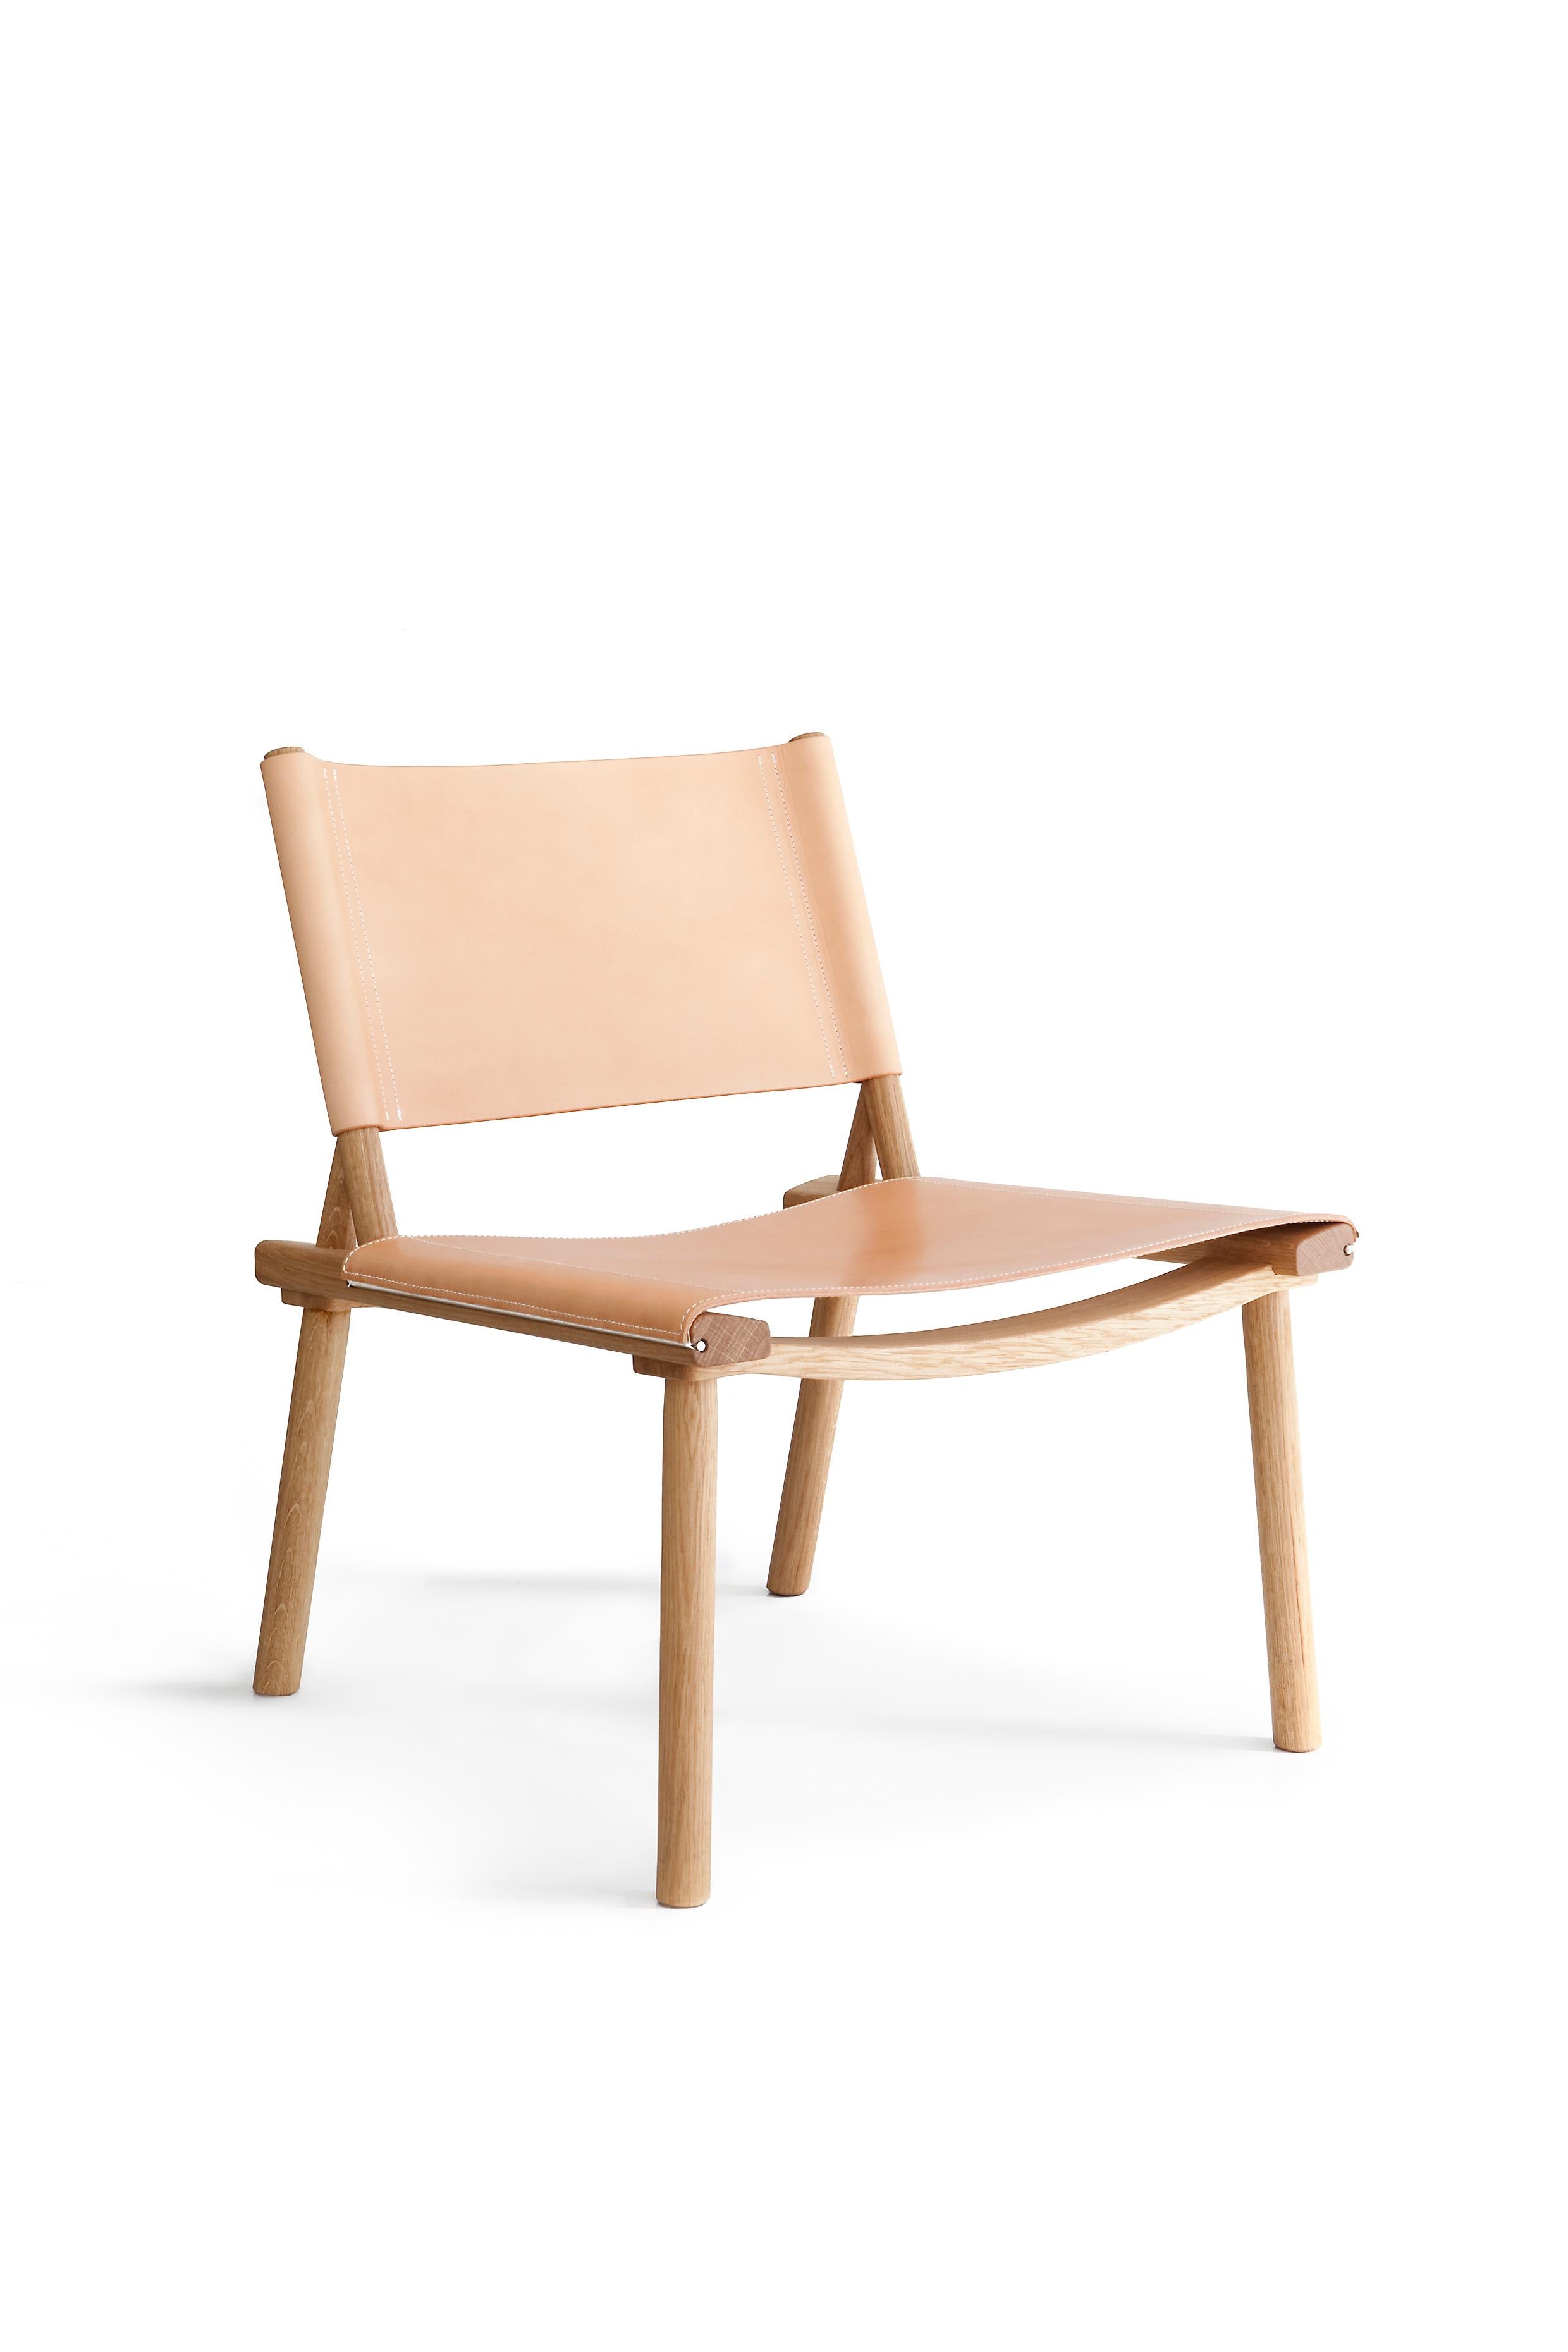 December chair is designed by Jasper Morrison and Wataru Kumano, 2012. The chair is light and comfortable, and thanks to its simple Nordic design it suits both modern and traditional interiors.
Available in ash or oak frame with canvas, nude